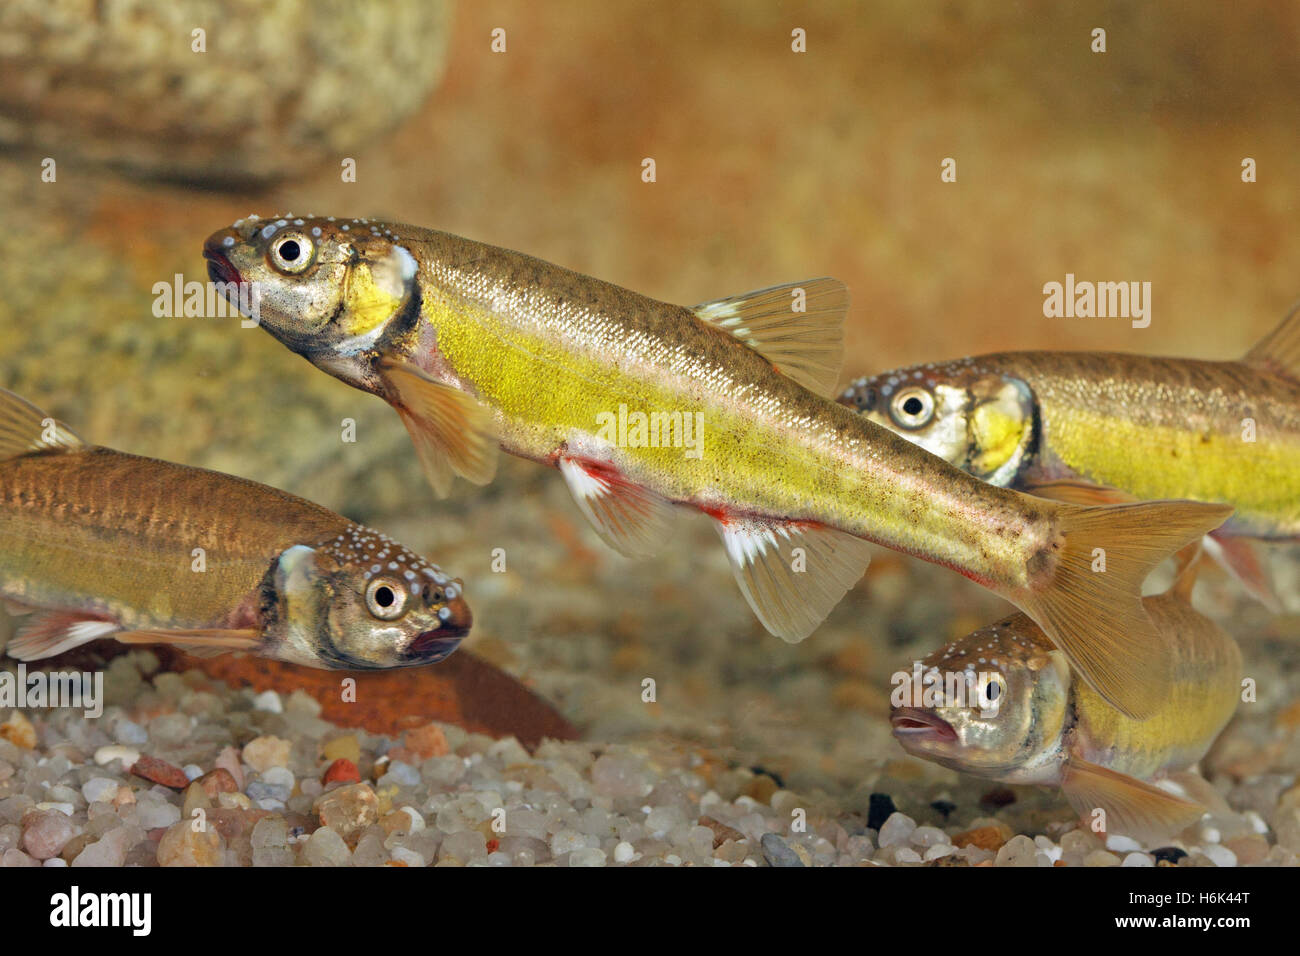 The Eurasian minnow, minnow, or common minnow (Phoxinus phoxinus) is a small species of freshwater fish in the carp family Cyprinidae. Stock Photo